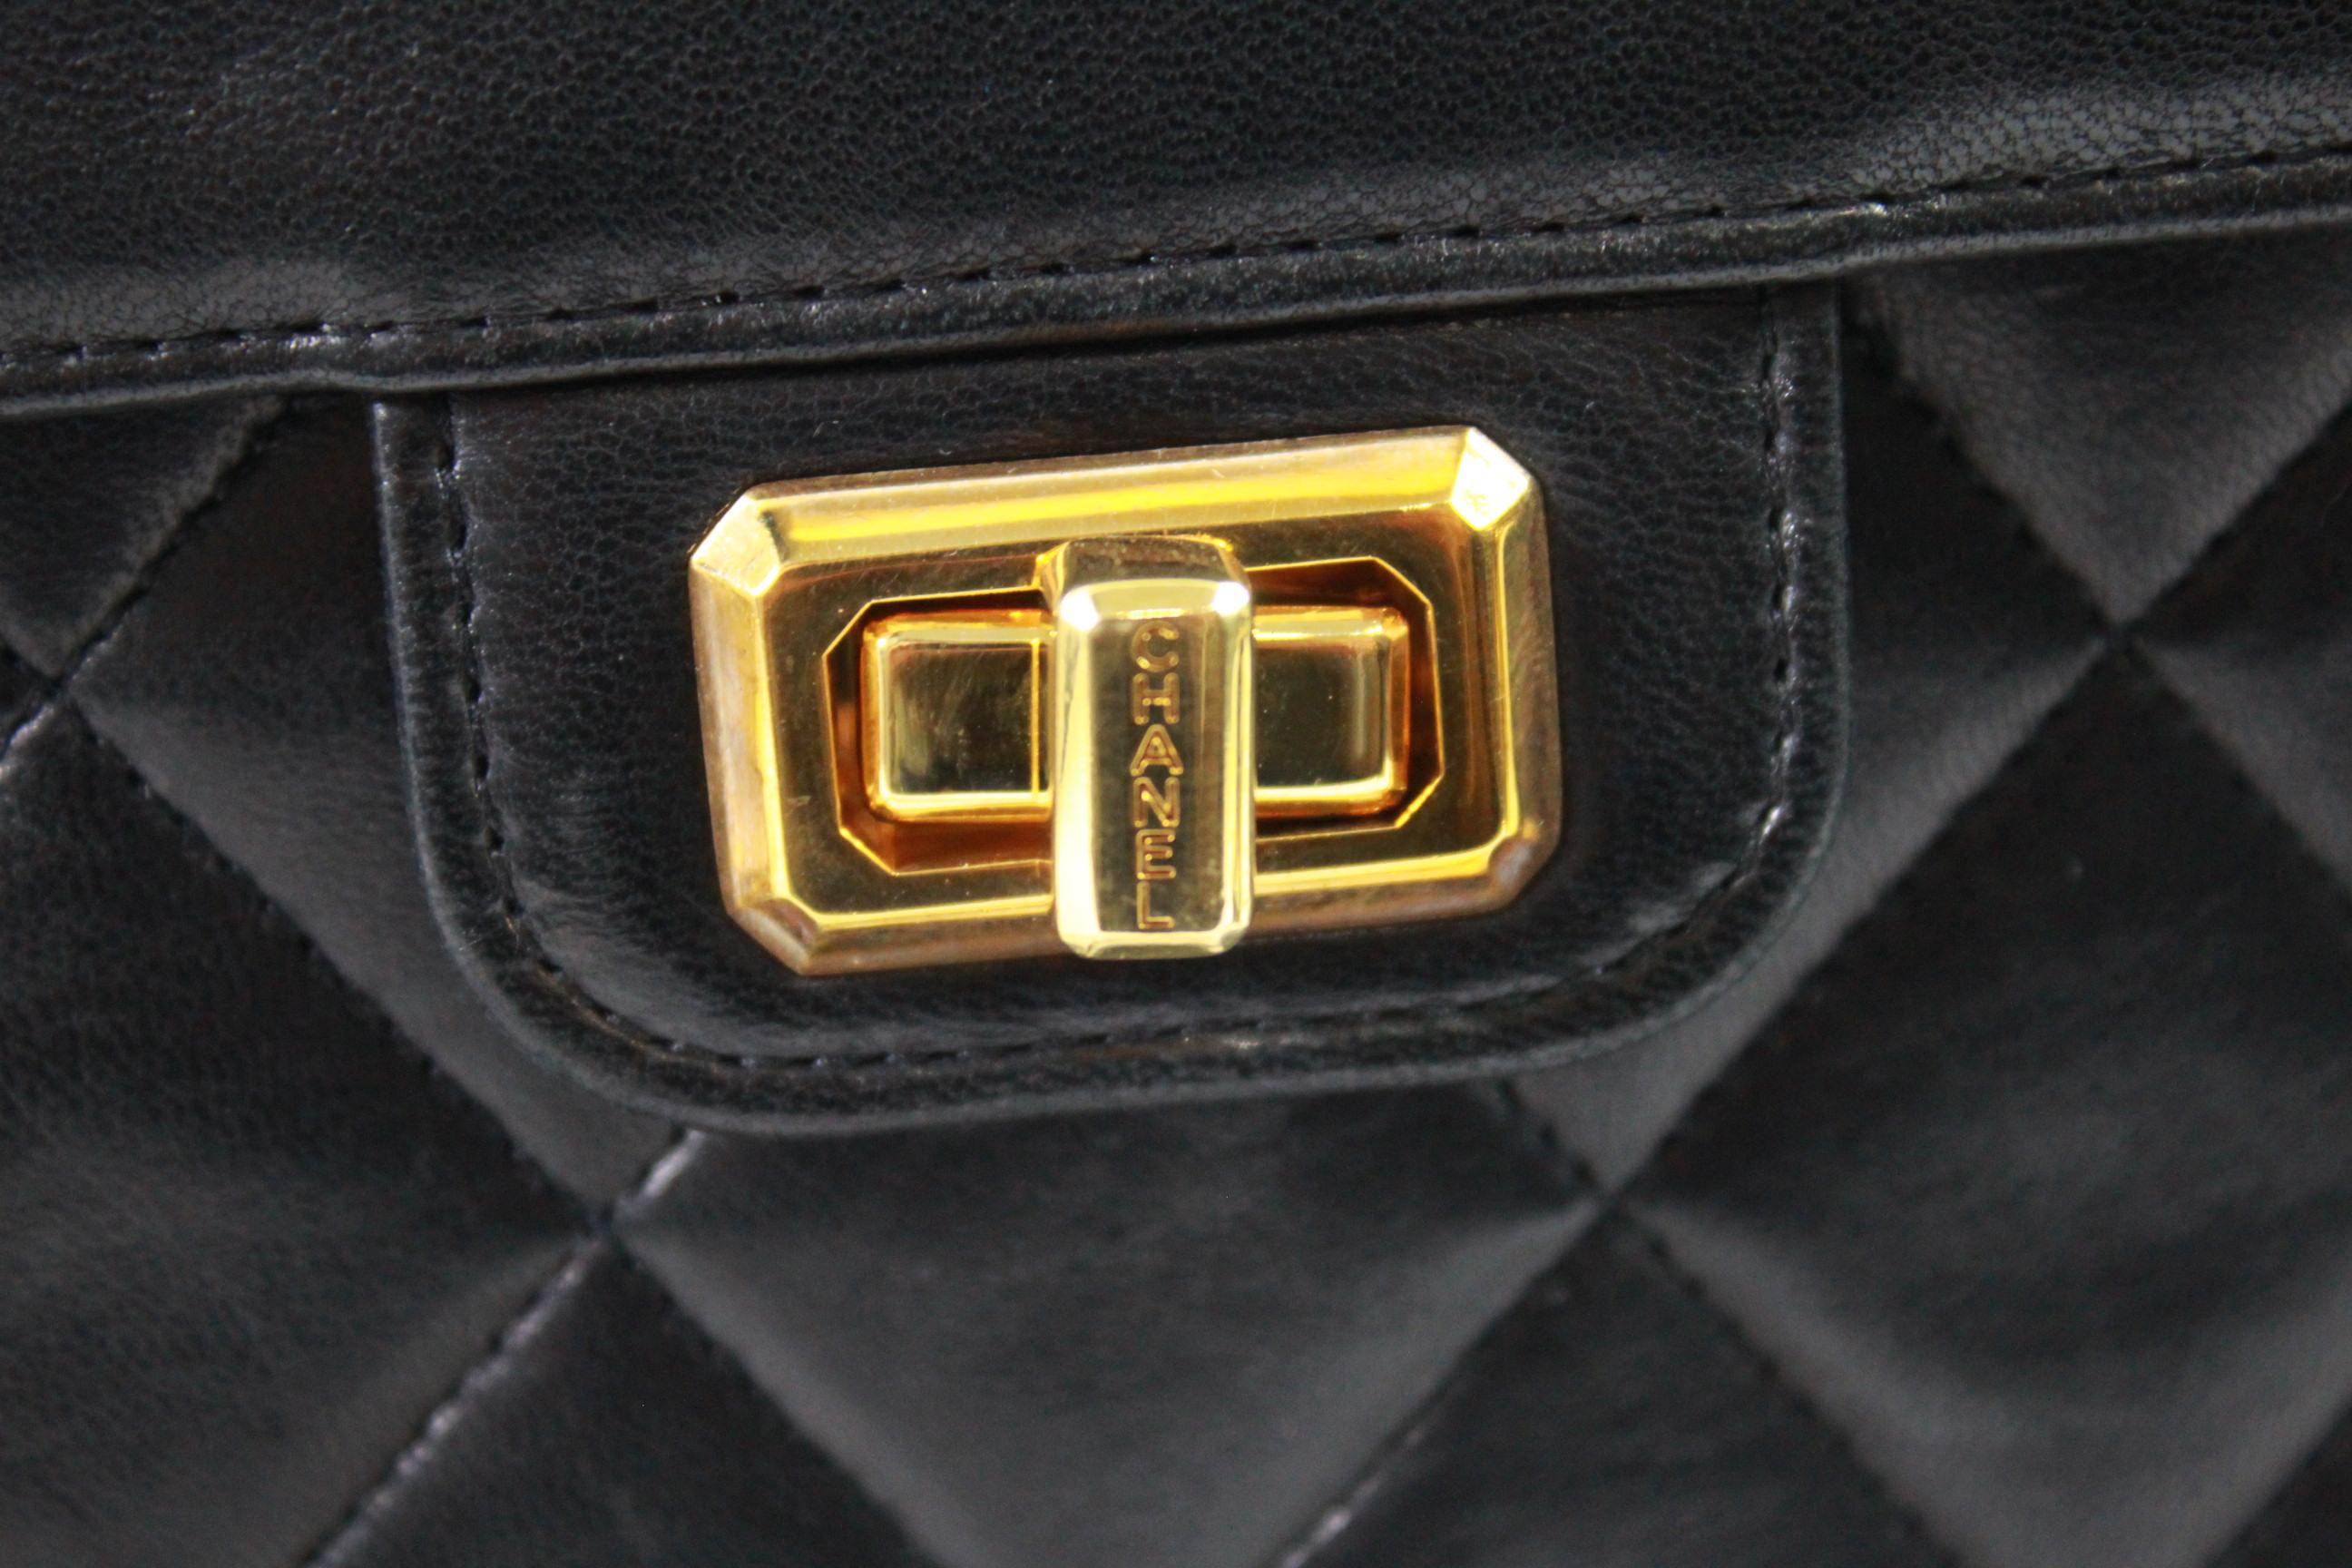 Vintage Chanel black lambskin leather bag with Godlen hardware.
Sold with vard and hologram.
Good vintage condition, light signss of use.
Size 26*19 centimeters